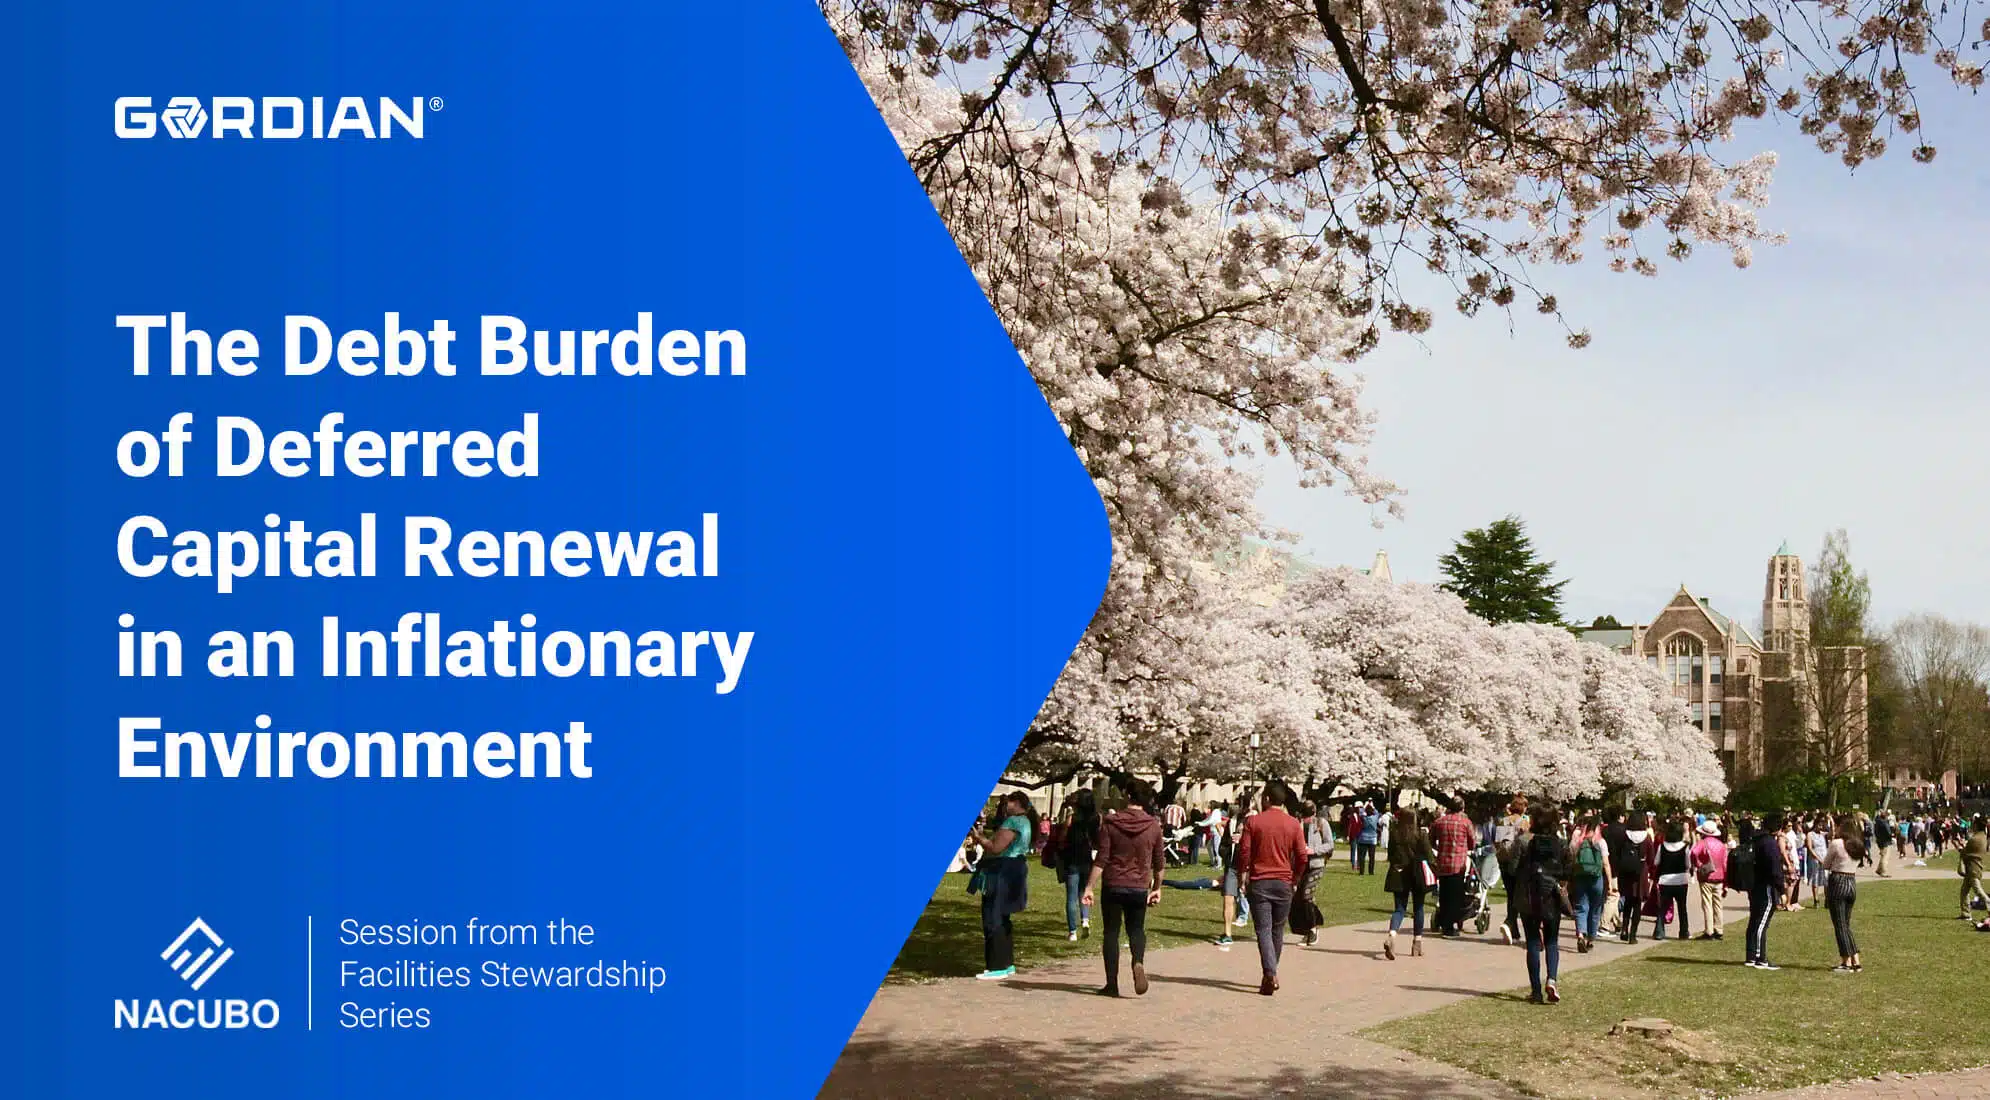 Facilities Stewardship Series: The Debt Burden of Deferred Capital Renewal in an Inflationary Environment